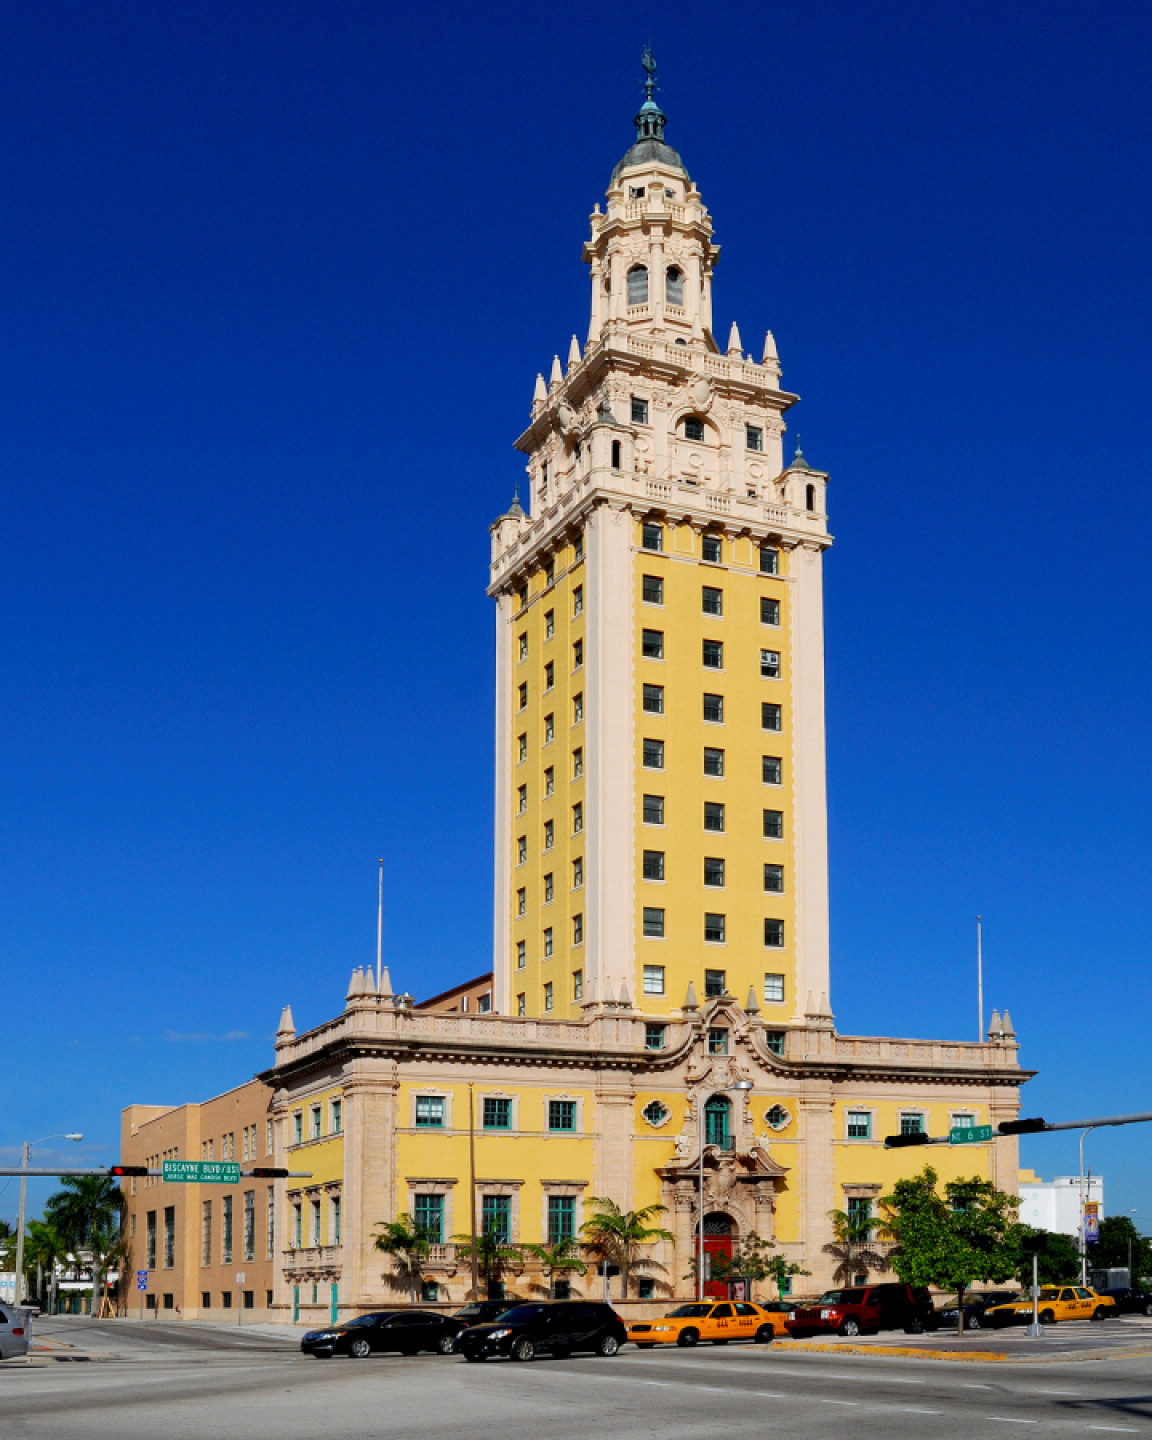 Discover Miami Through Music at the Freedom Tower